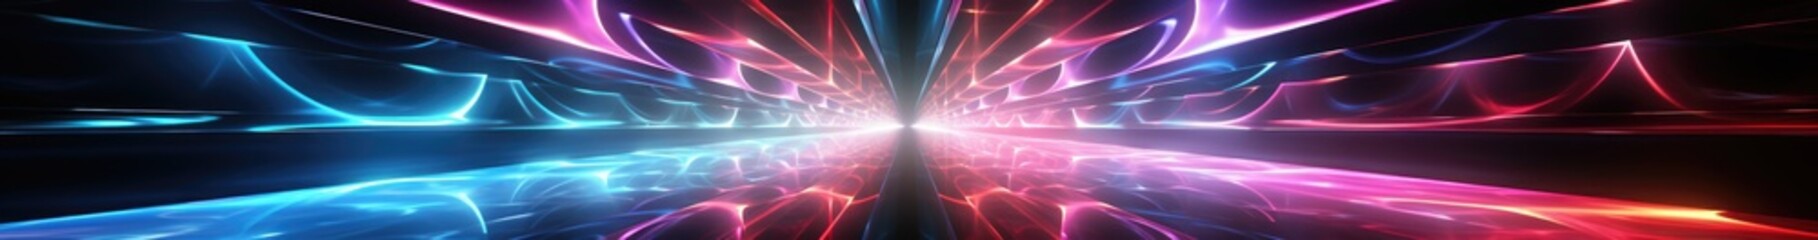 3d render, abstract pink blue projector, neon light over black background. Square geometric shape glowing. Laser show illumination. Disco rays, colorful beam